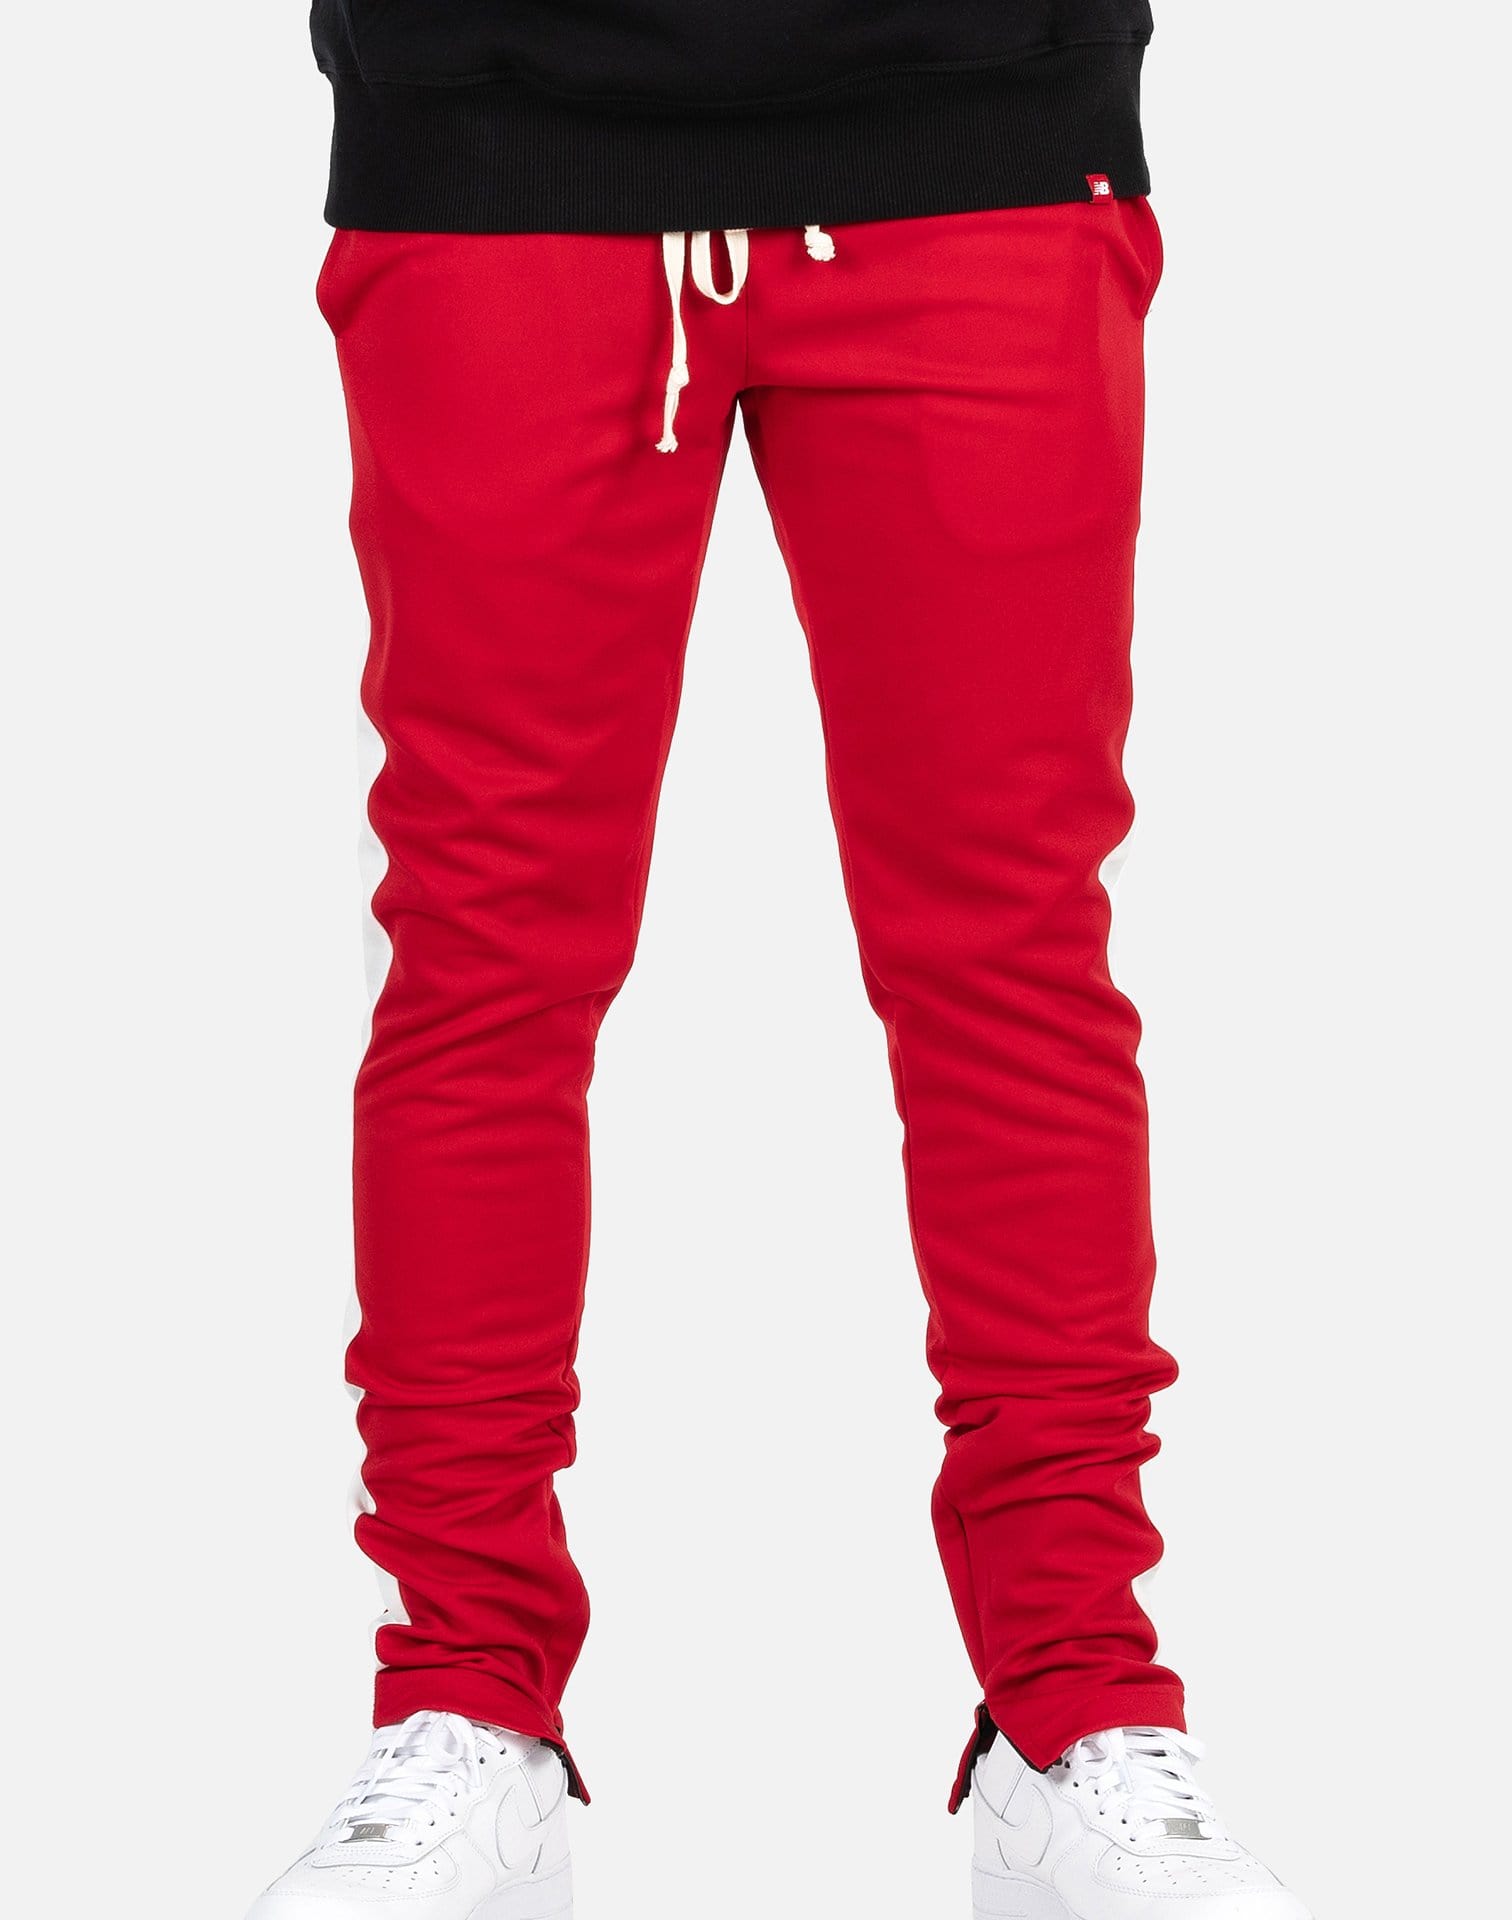 Fashion (red)Mens Joggers Casual Pants Fitness Men Sportswear Tracksuit  Bottoms Skinny Sweatpants Trousers Black Gyms Jogger Track Pants OM @ Best  Price Online | Jumia Egypt